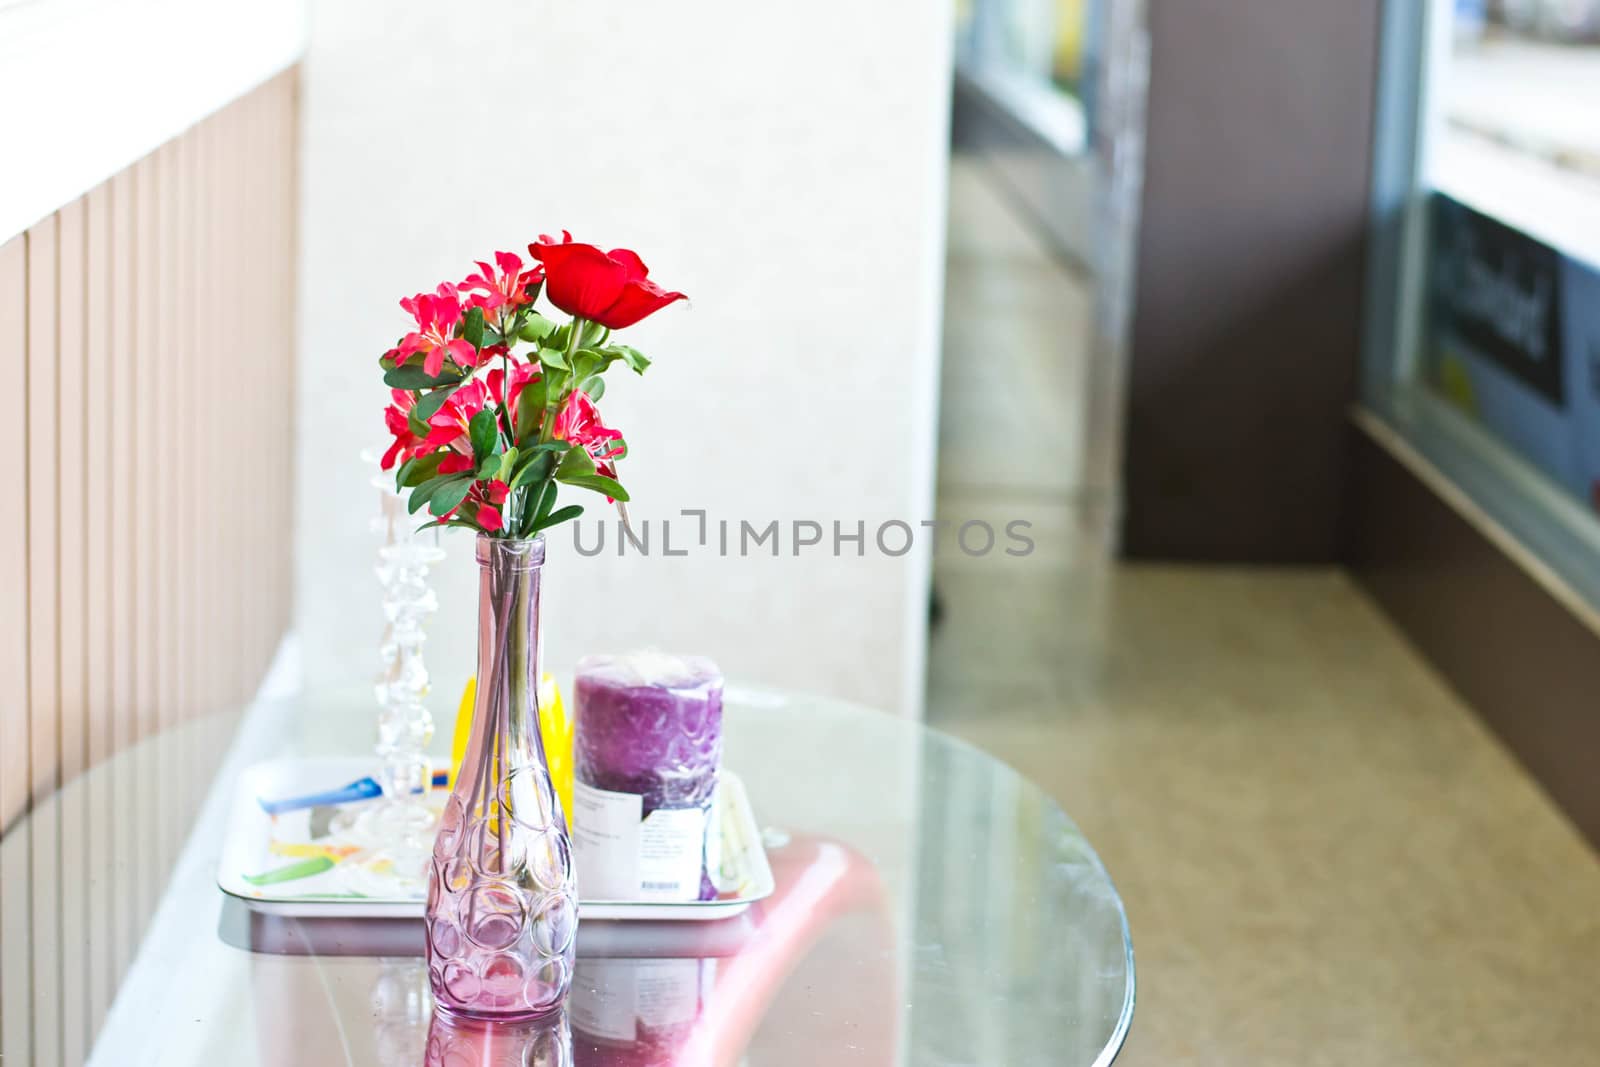 Flowers in a vase on the table by Thanamat